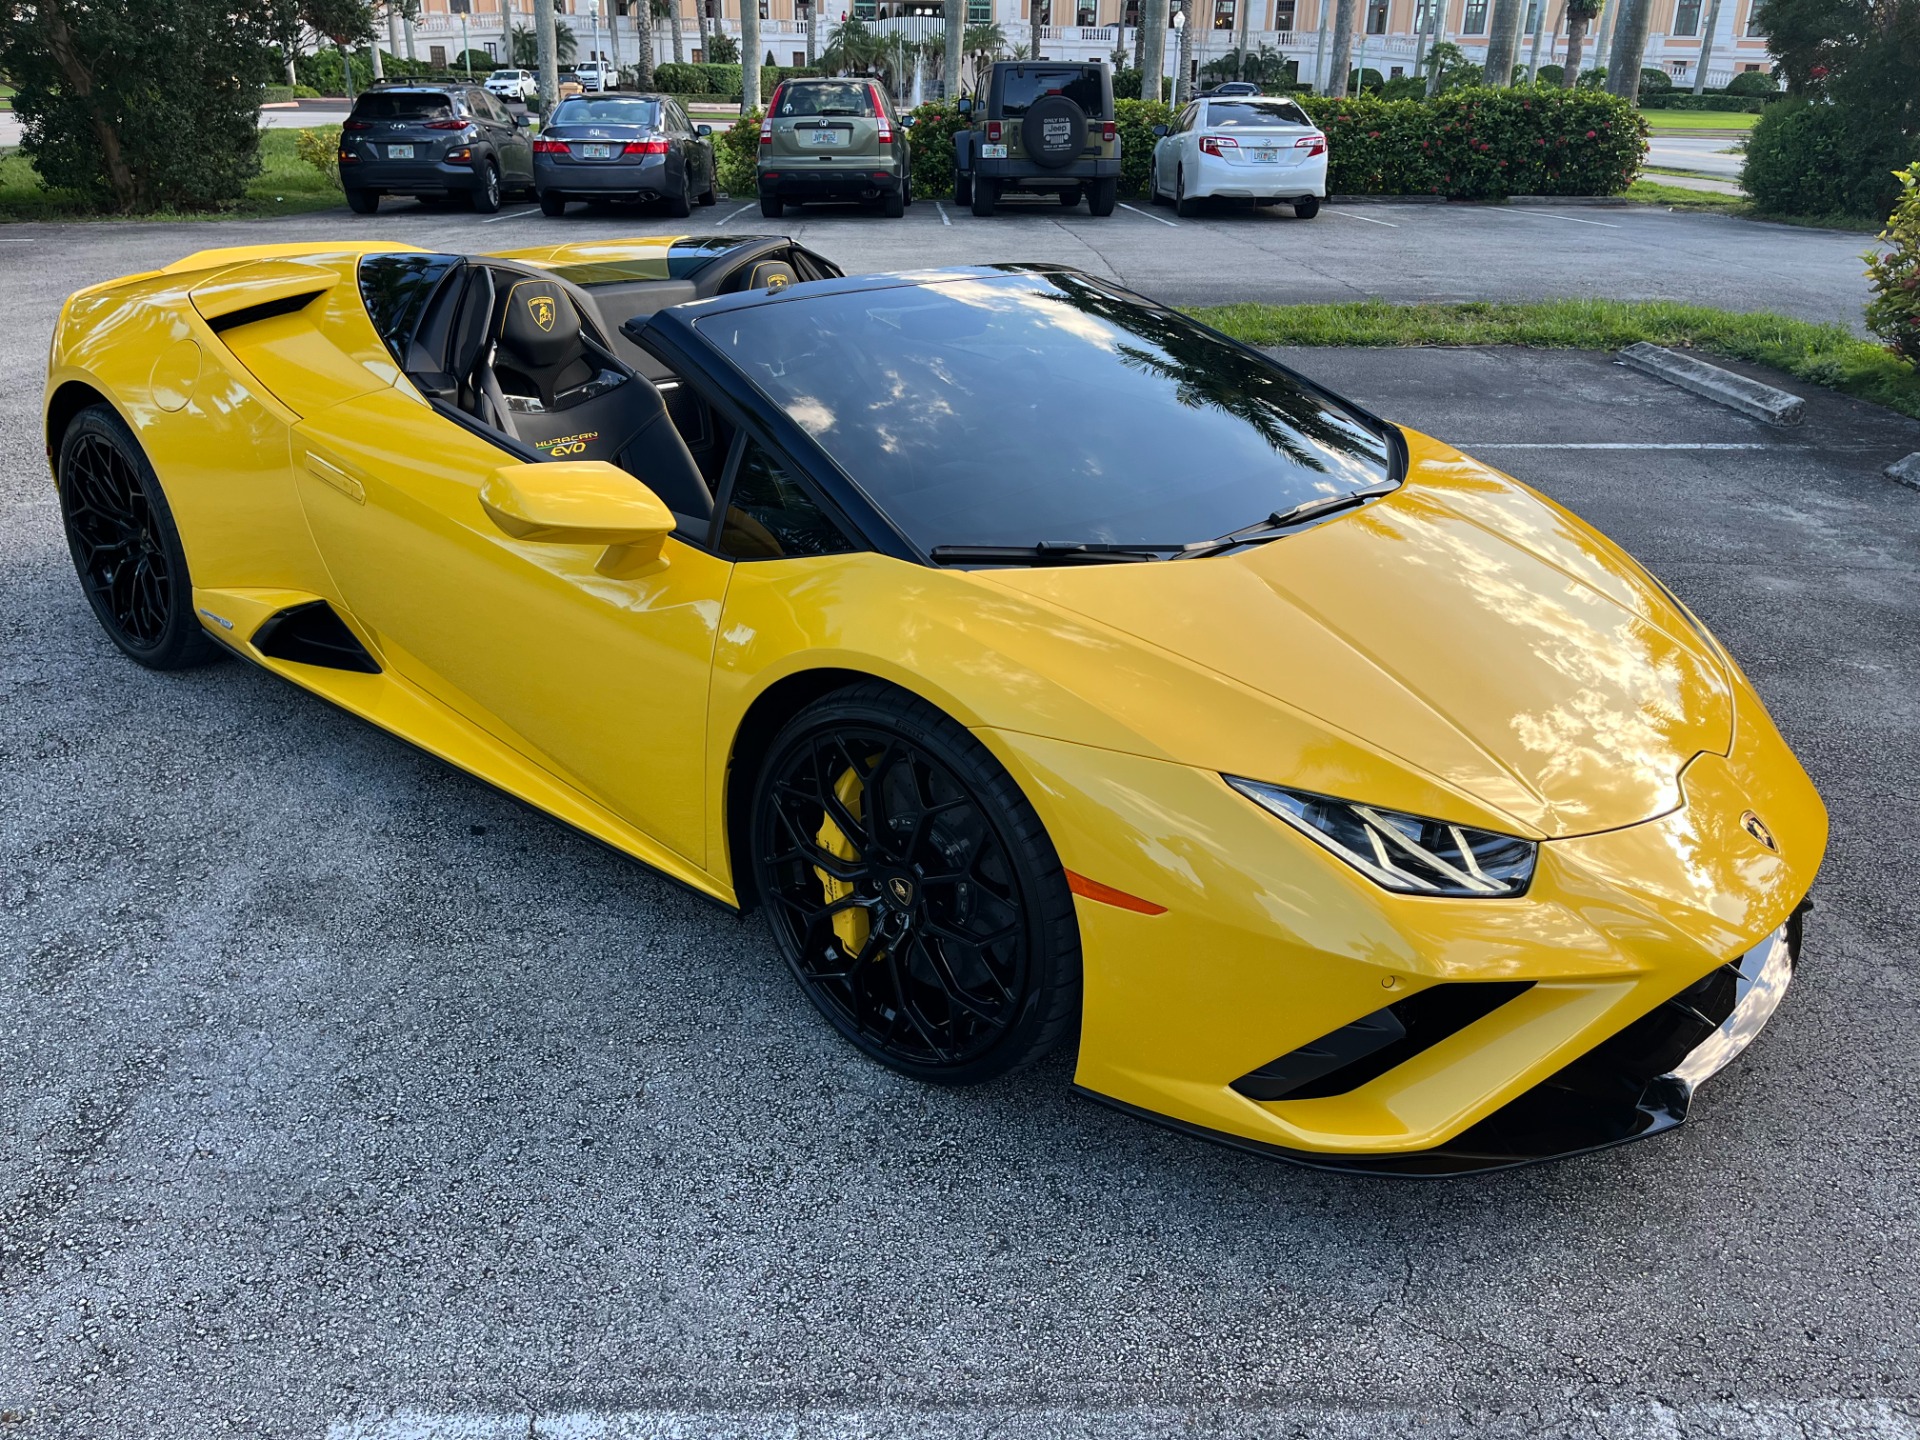 Used 2022 Lamborghini Huracan LP 610-4 EVO Spyder for sale Sold at The Gables Sports Cars in Miami FL 33146 4